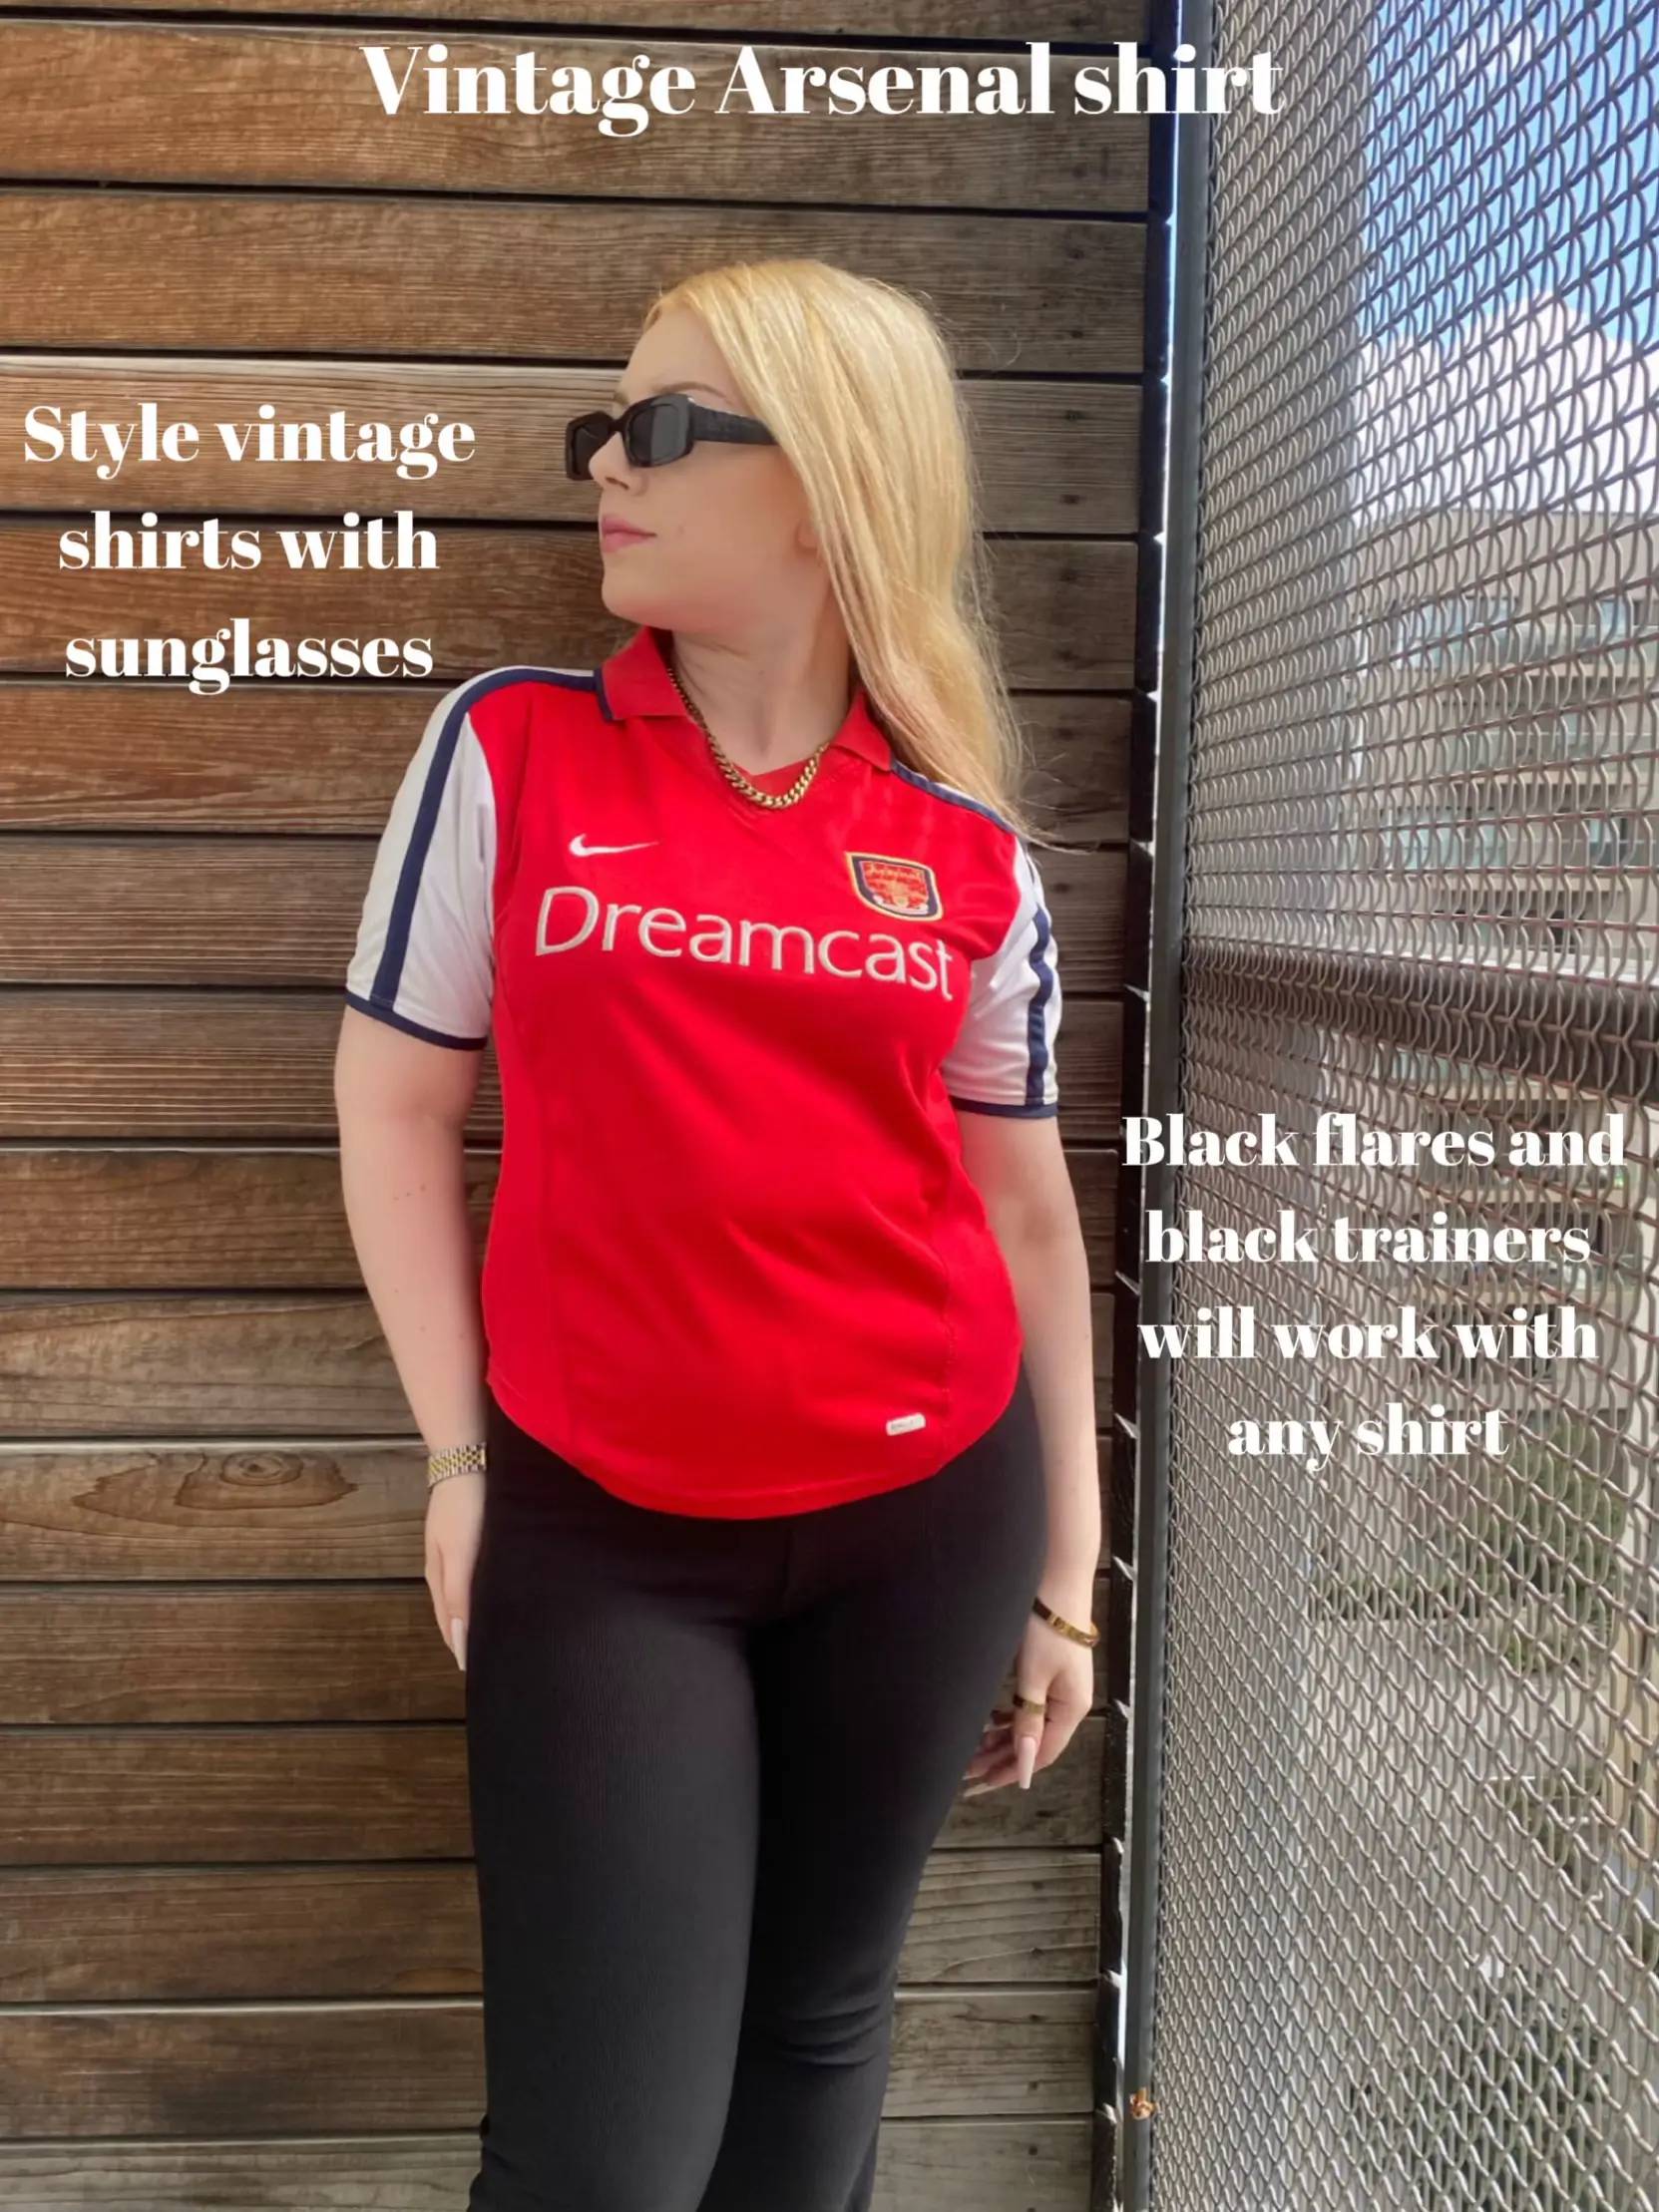 How to style football shirts, Gallery posted by LucyC